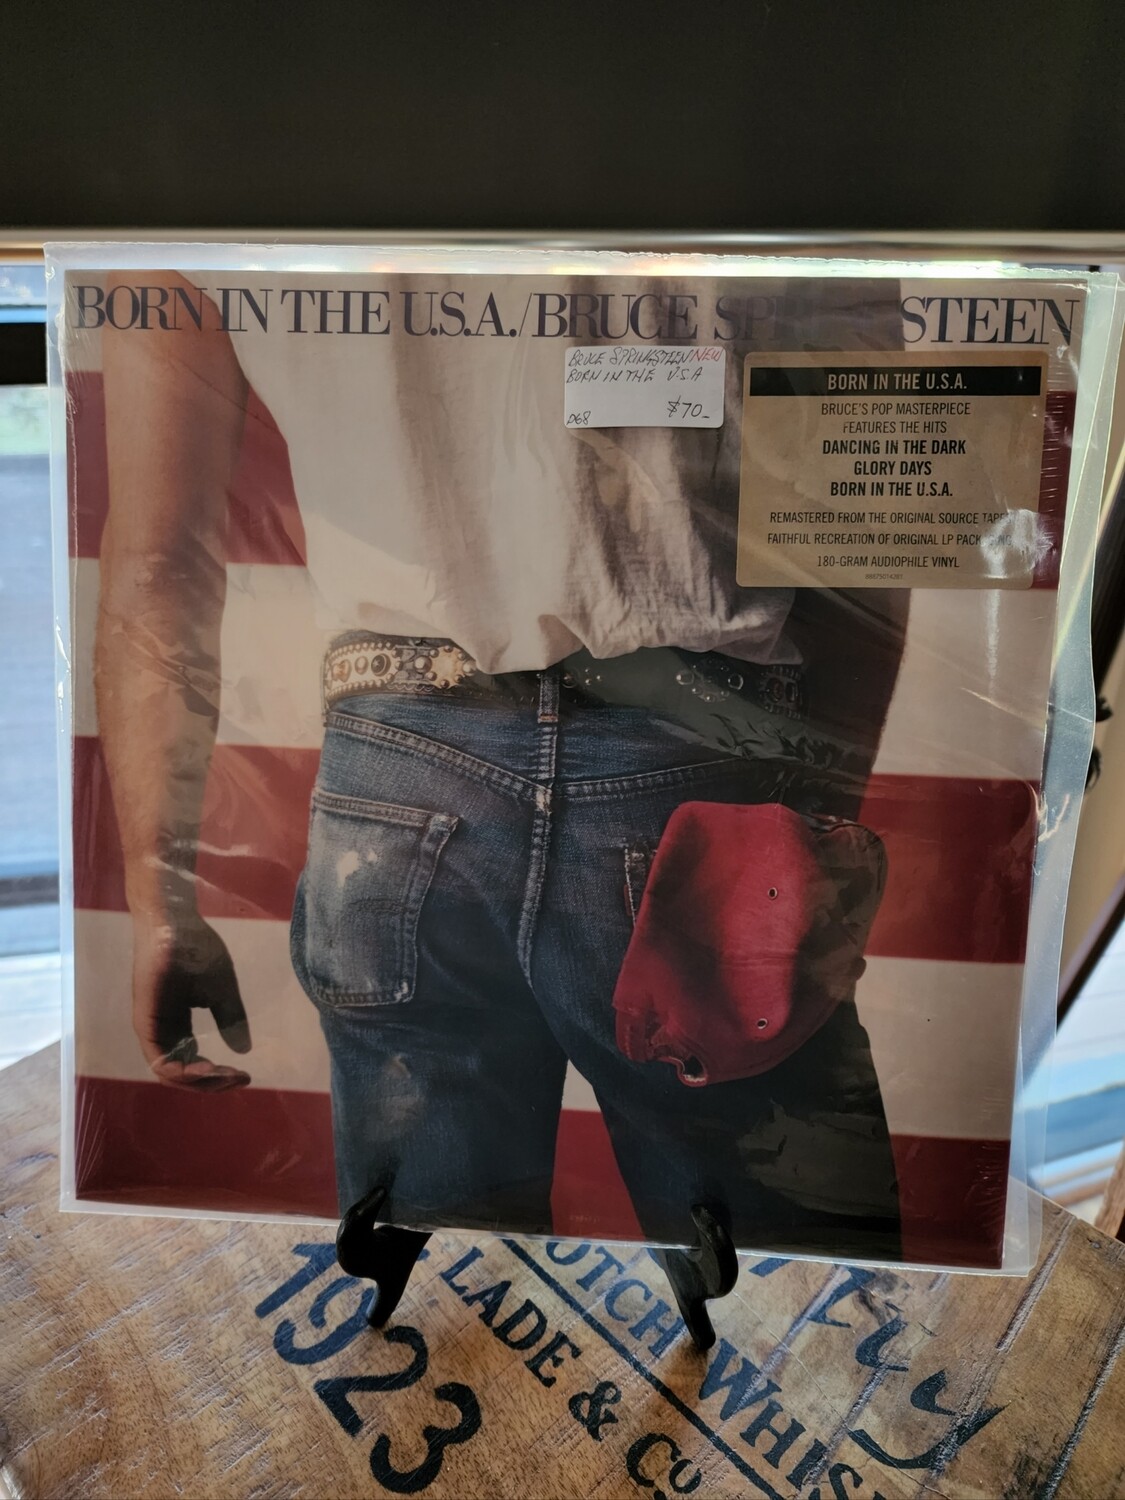 BRUCE SPRINGSTEEN BORN IN THE U.S.A "NEW"